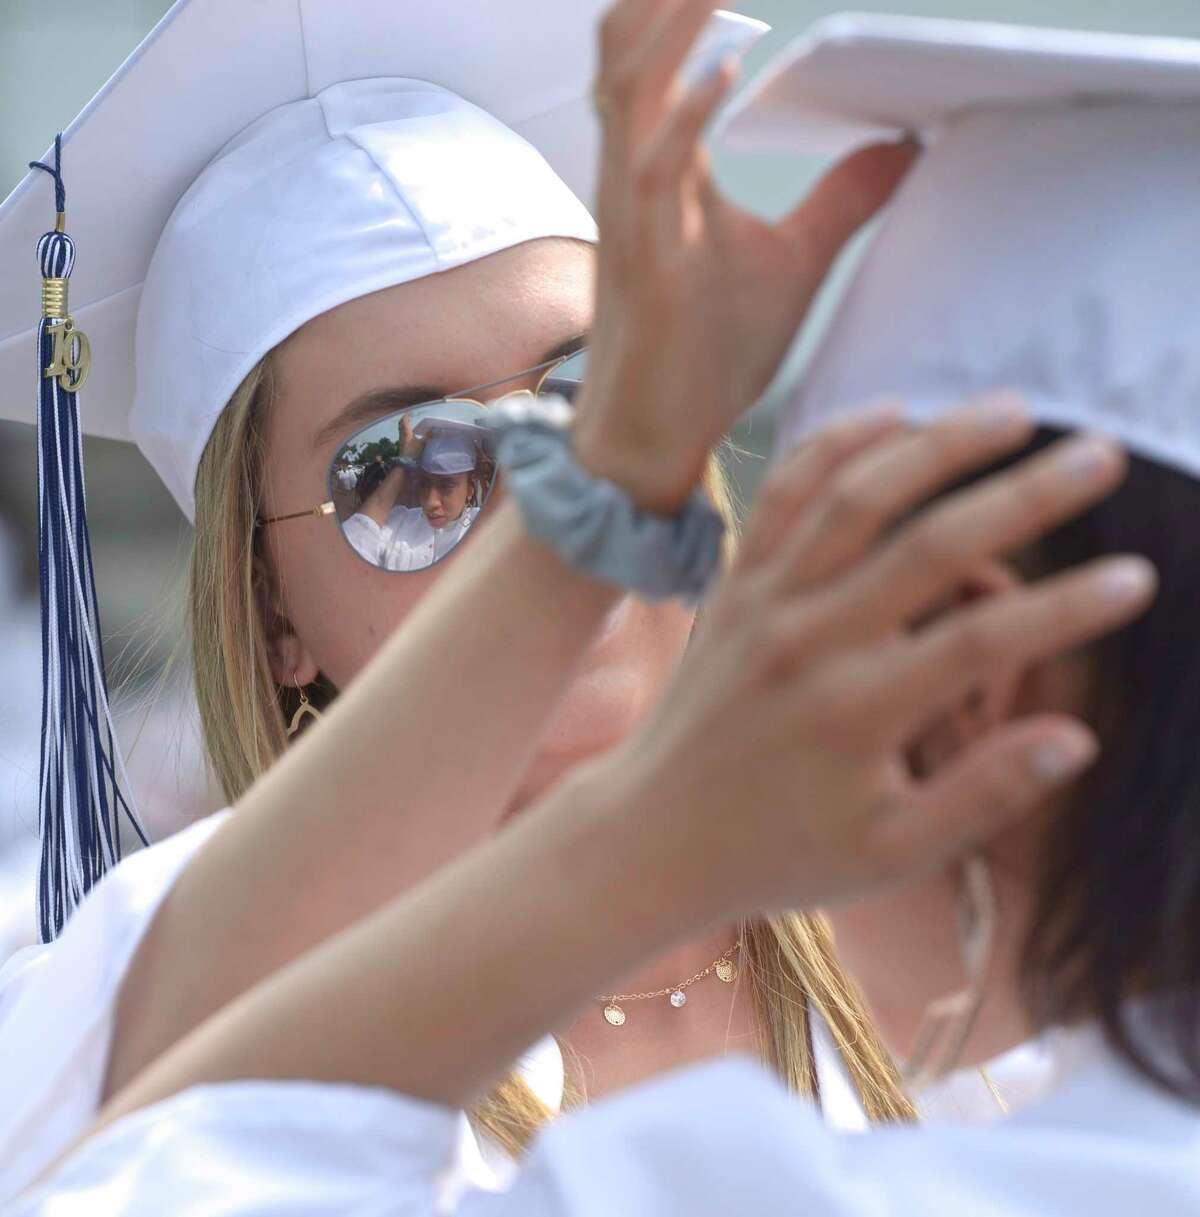 Vanesa Katherine Roma, of Danbury, adjusts the cap of Jessica Dennison, of Danbury, before the Immaculate High School 2019 Commencement. Saturday, June 1, 2019, at the Western Connecticut State University O'Neill Center, Danbury, Conn.